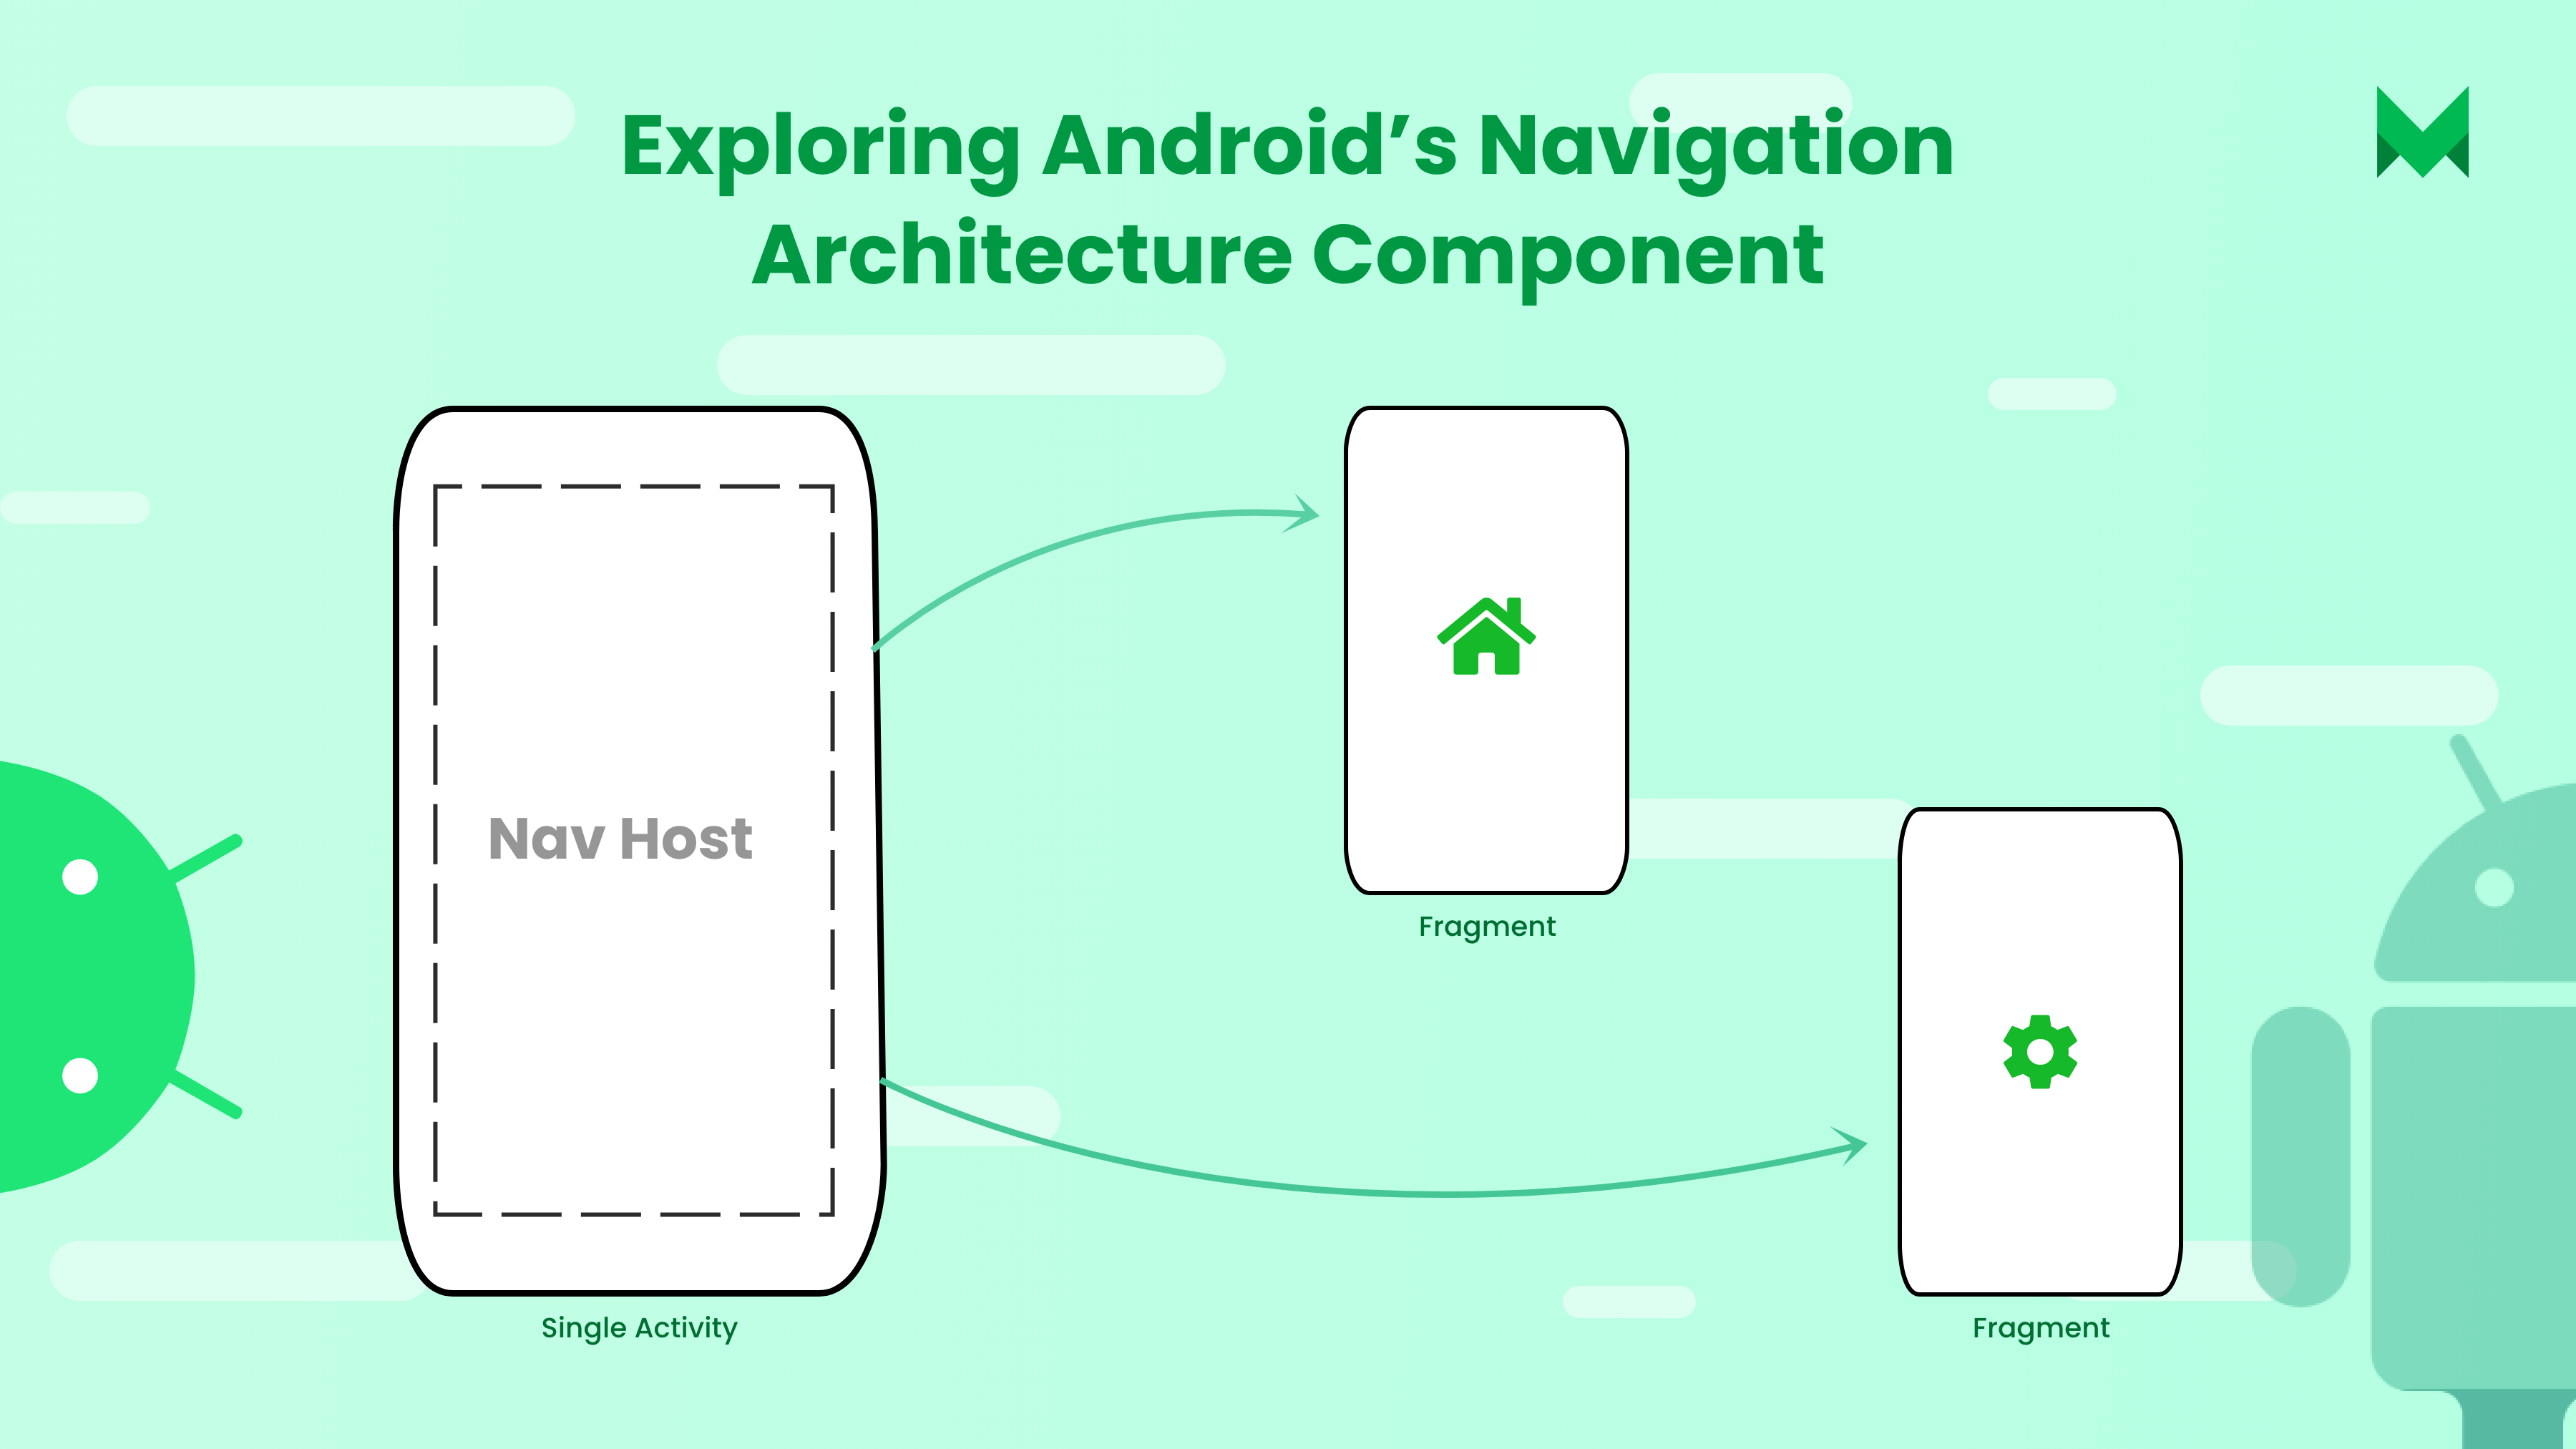 Exploring Android’s Navigation Architecture Component